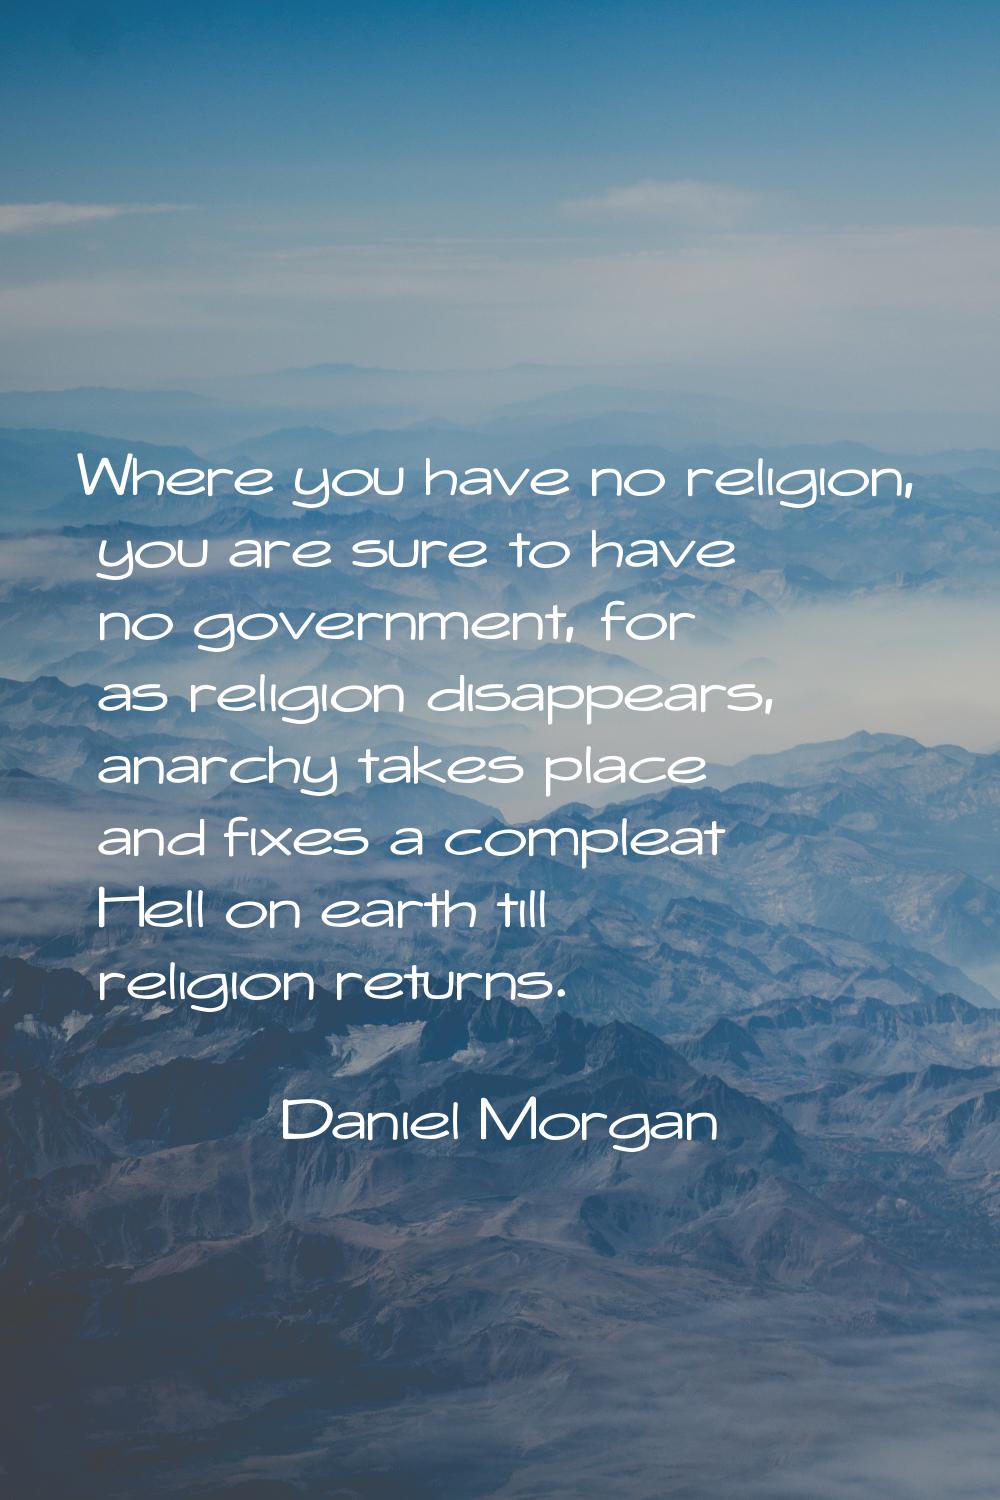 Where you have no religion, you are sure to have no government, for as religion disappears, anarchy